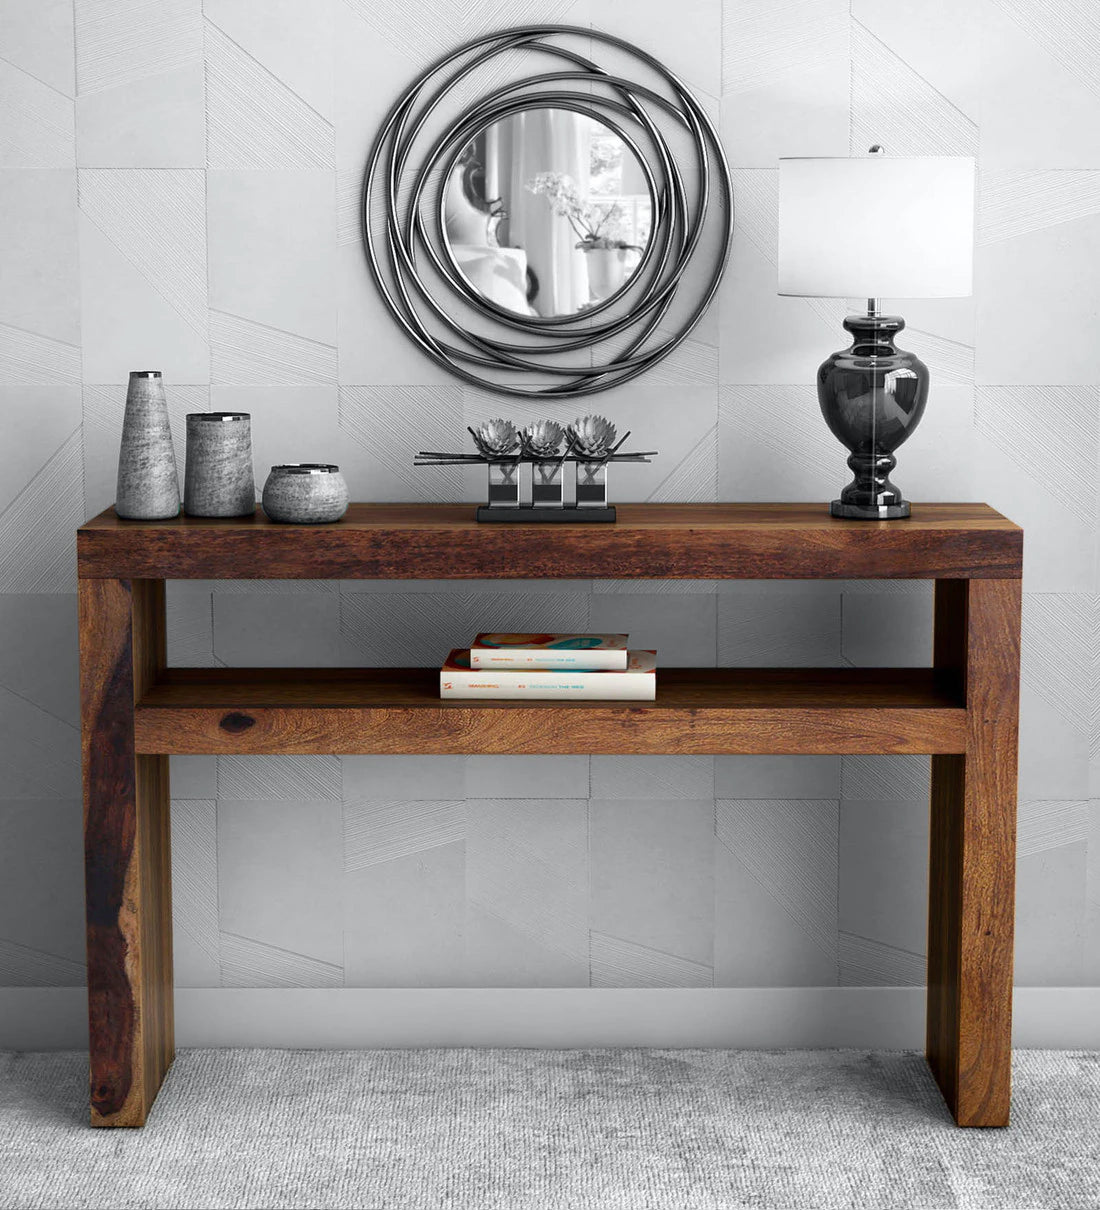 Acro Solid Wood Console Table For Living Room - Rajwada Furnish